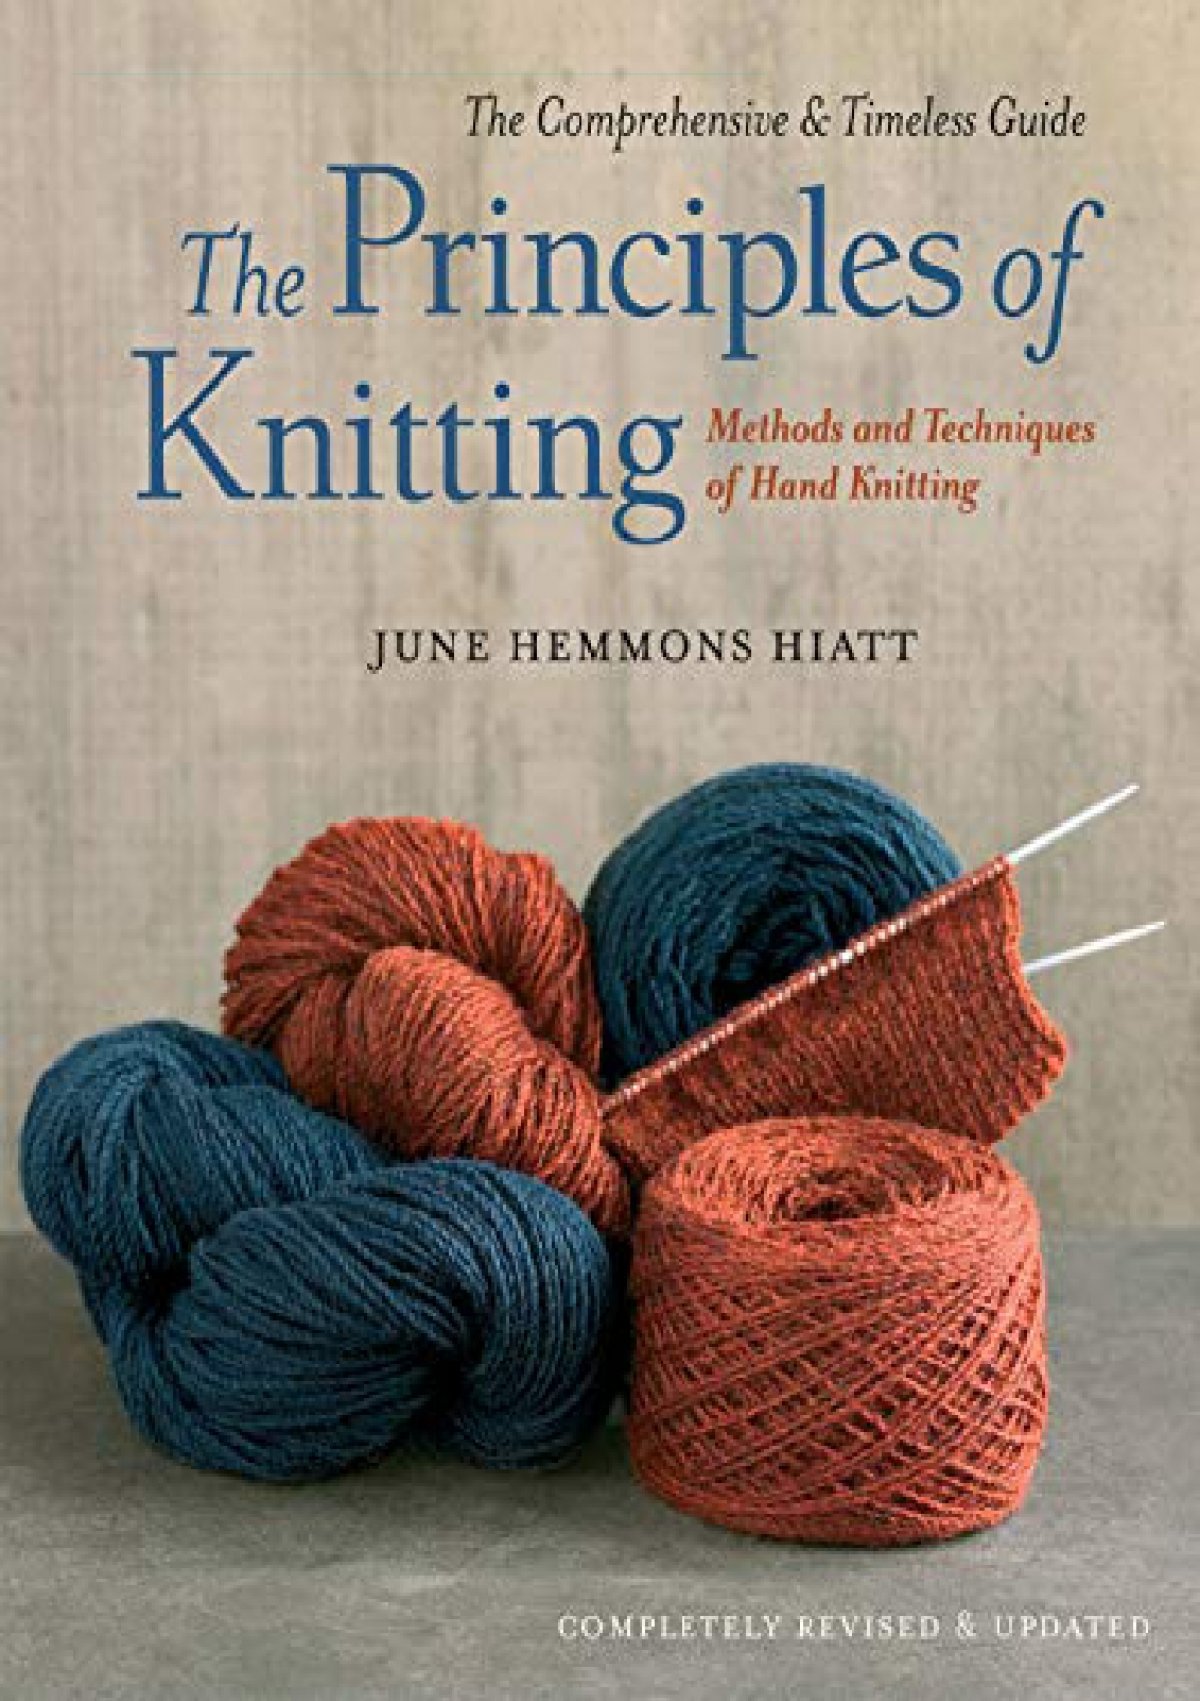 Download⚡ The Principles of Knitting